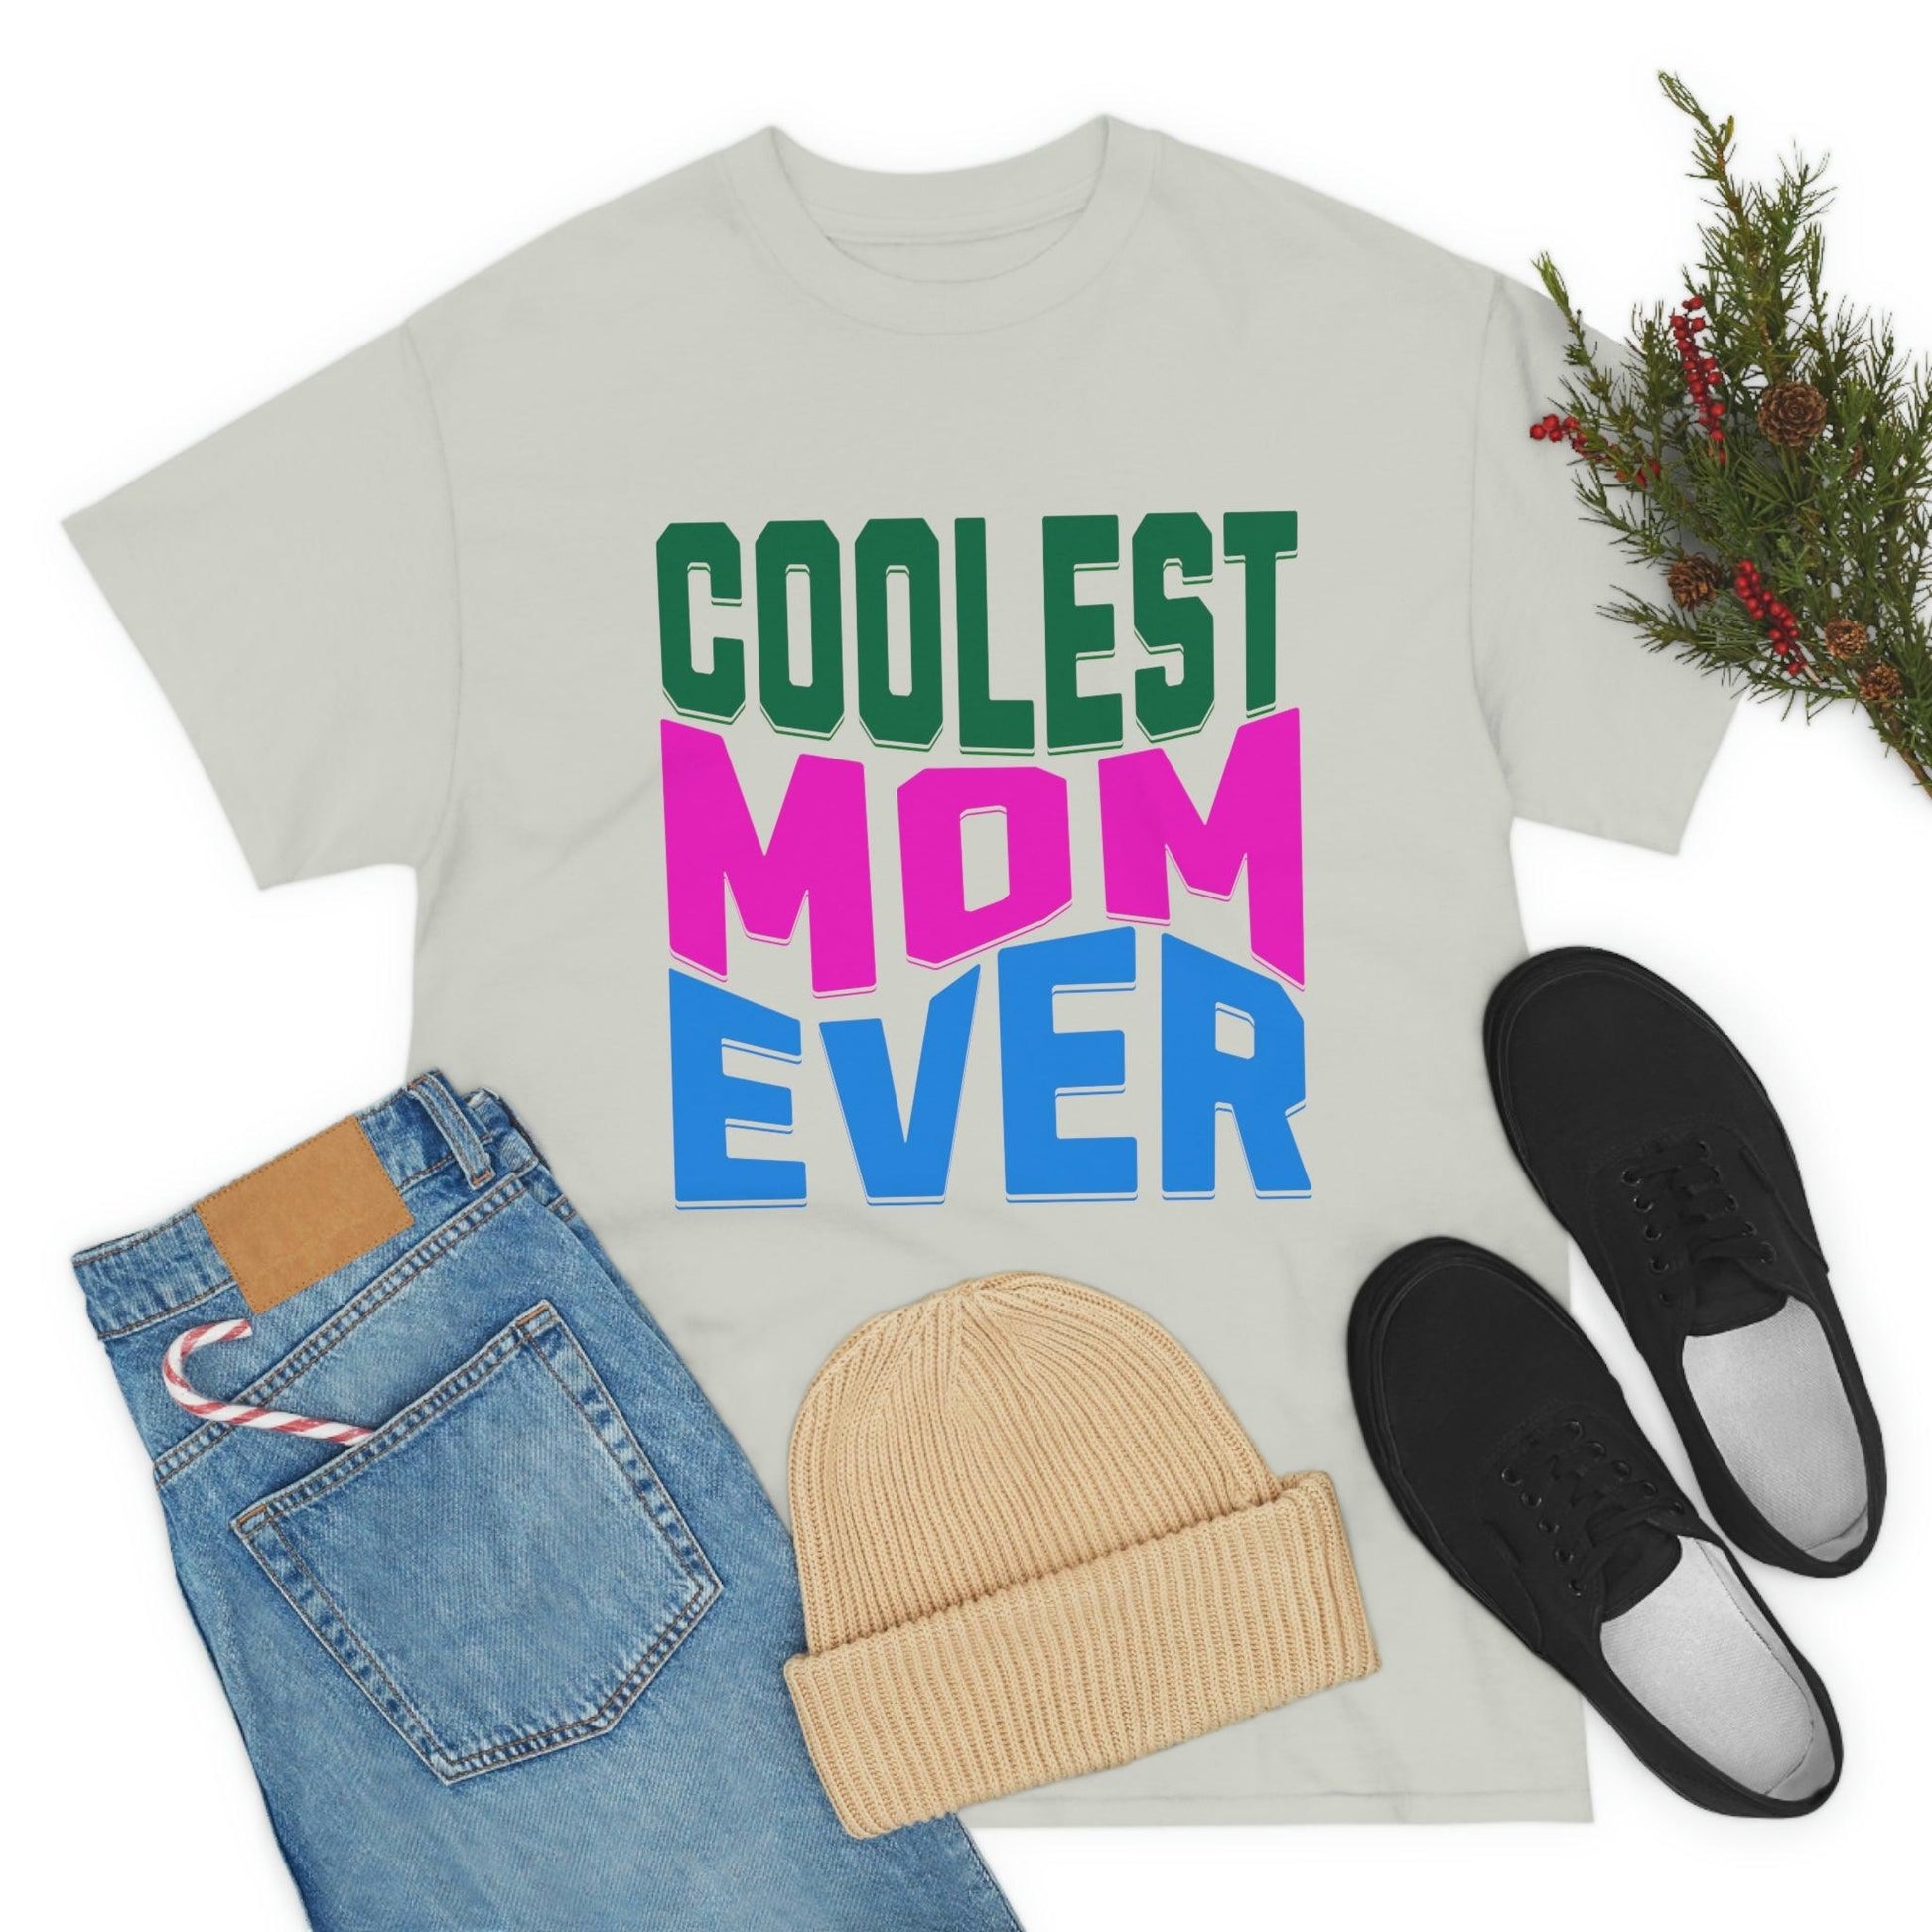 Coolest Mom Ever Tee - Giftsmojo